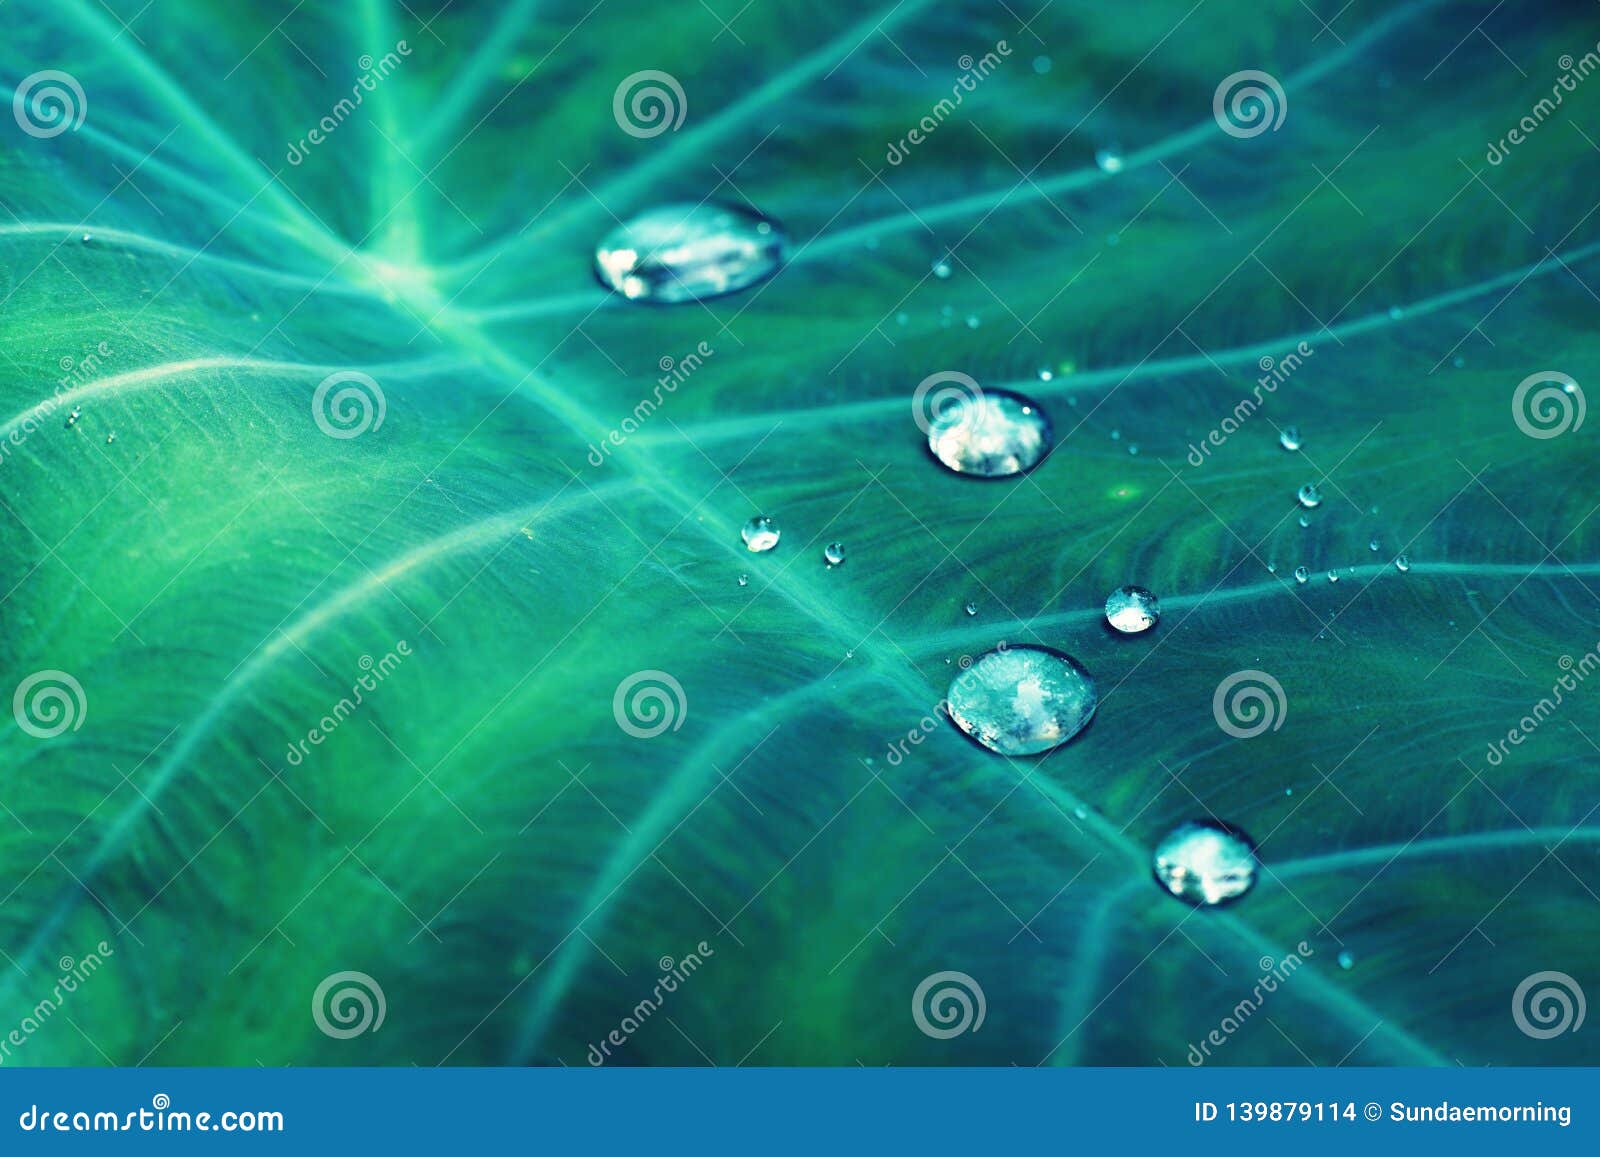 water drops on green araceae leaf texture, beautiful nature texture background concept